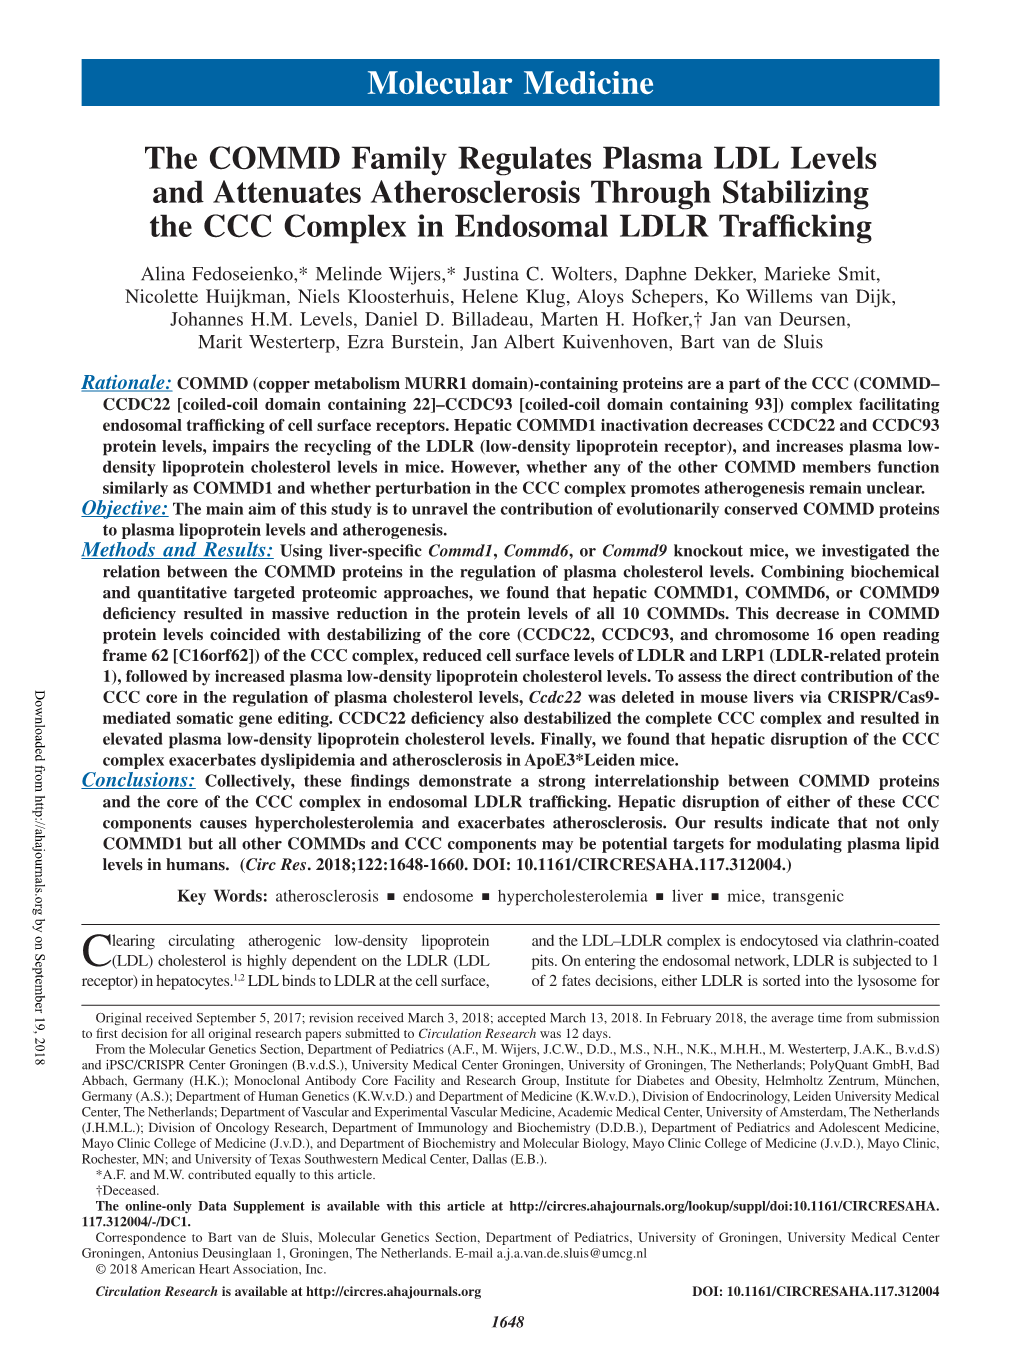 The COMMD Family Regulates Plasma LDL Levels and Attenuates Atherosclerosis Through Stabilizing the CCC Complex in Endosomal LDLR Trafficking